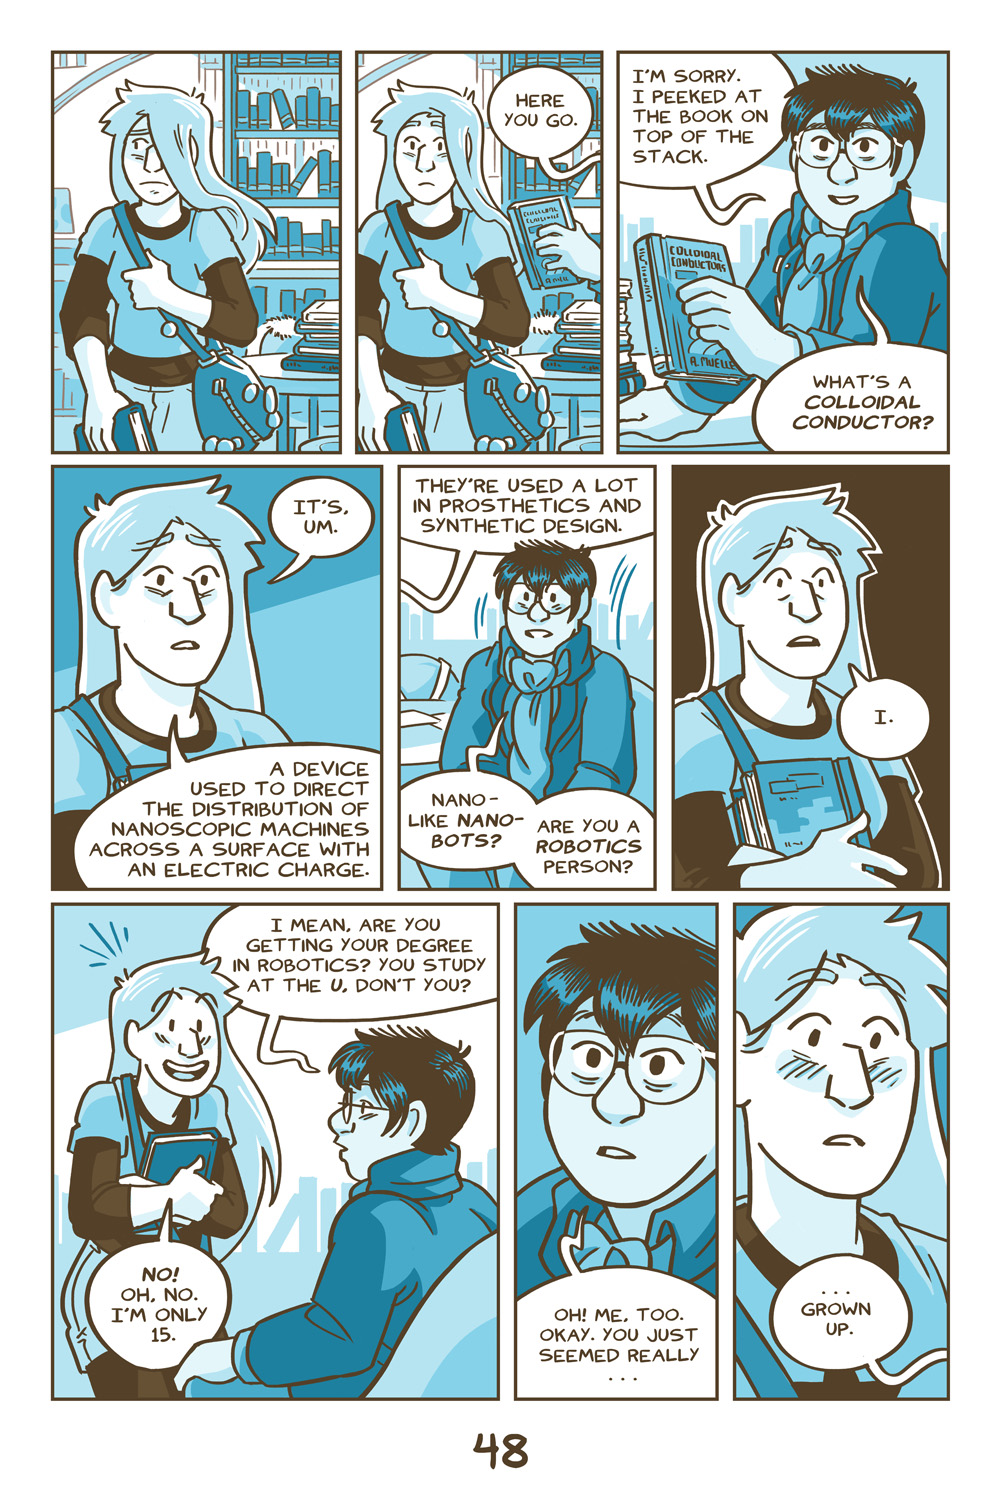 Chapter 3, Page 48